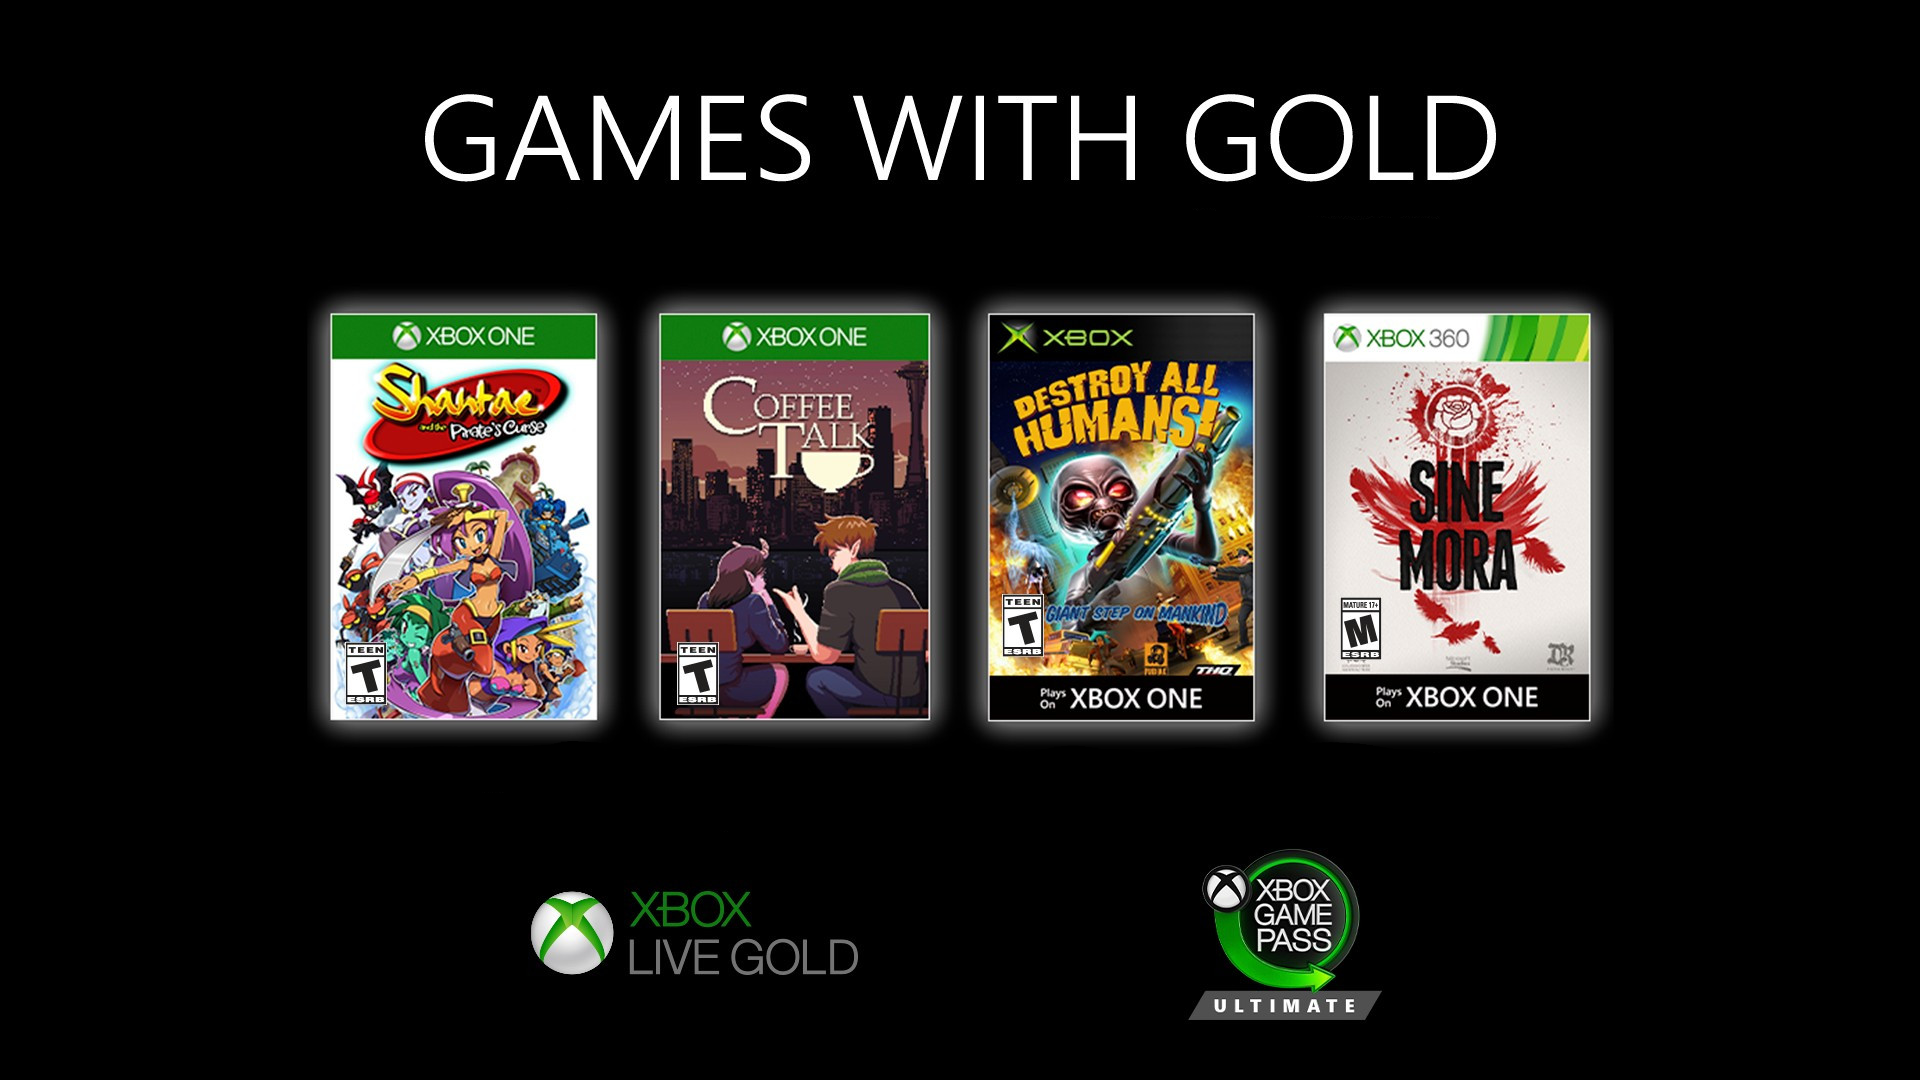 convert xbox live gold to game pass